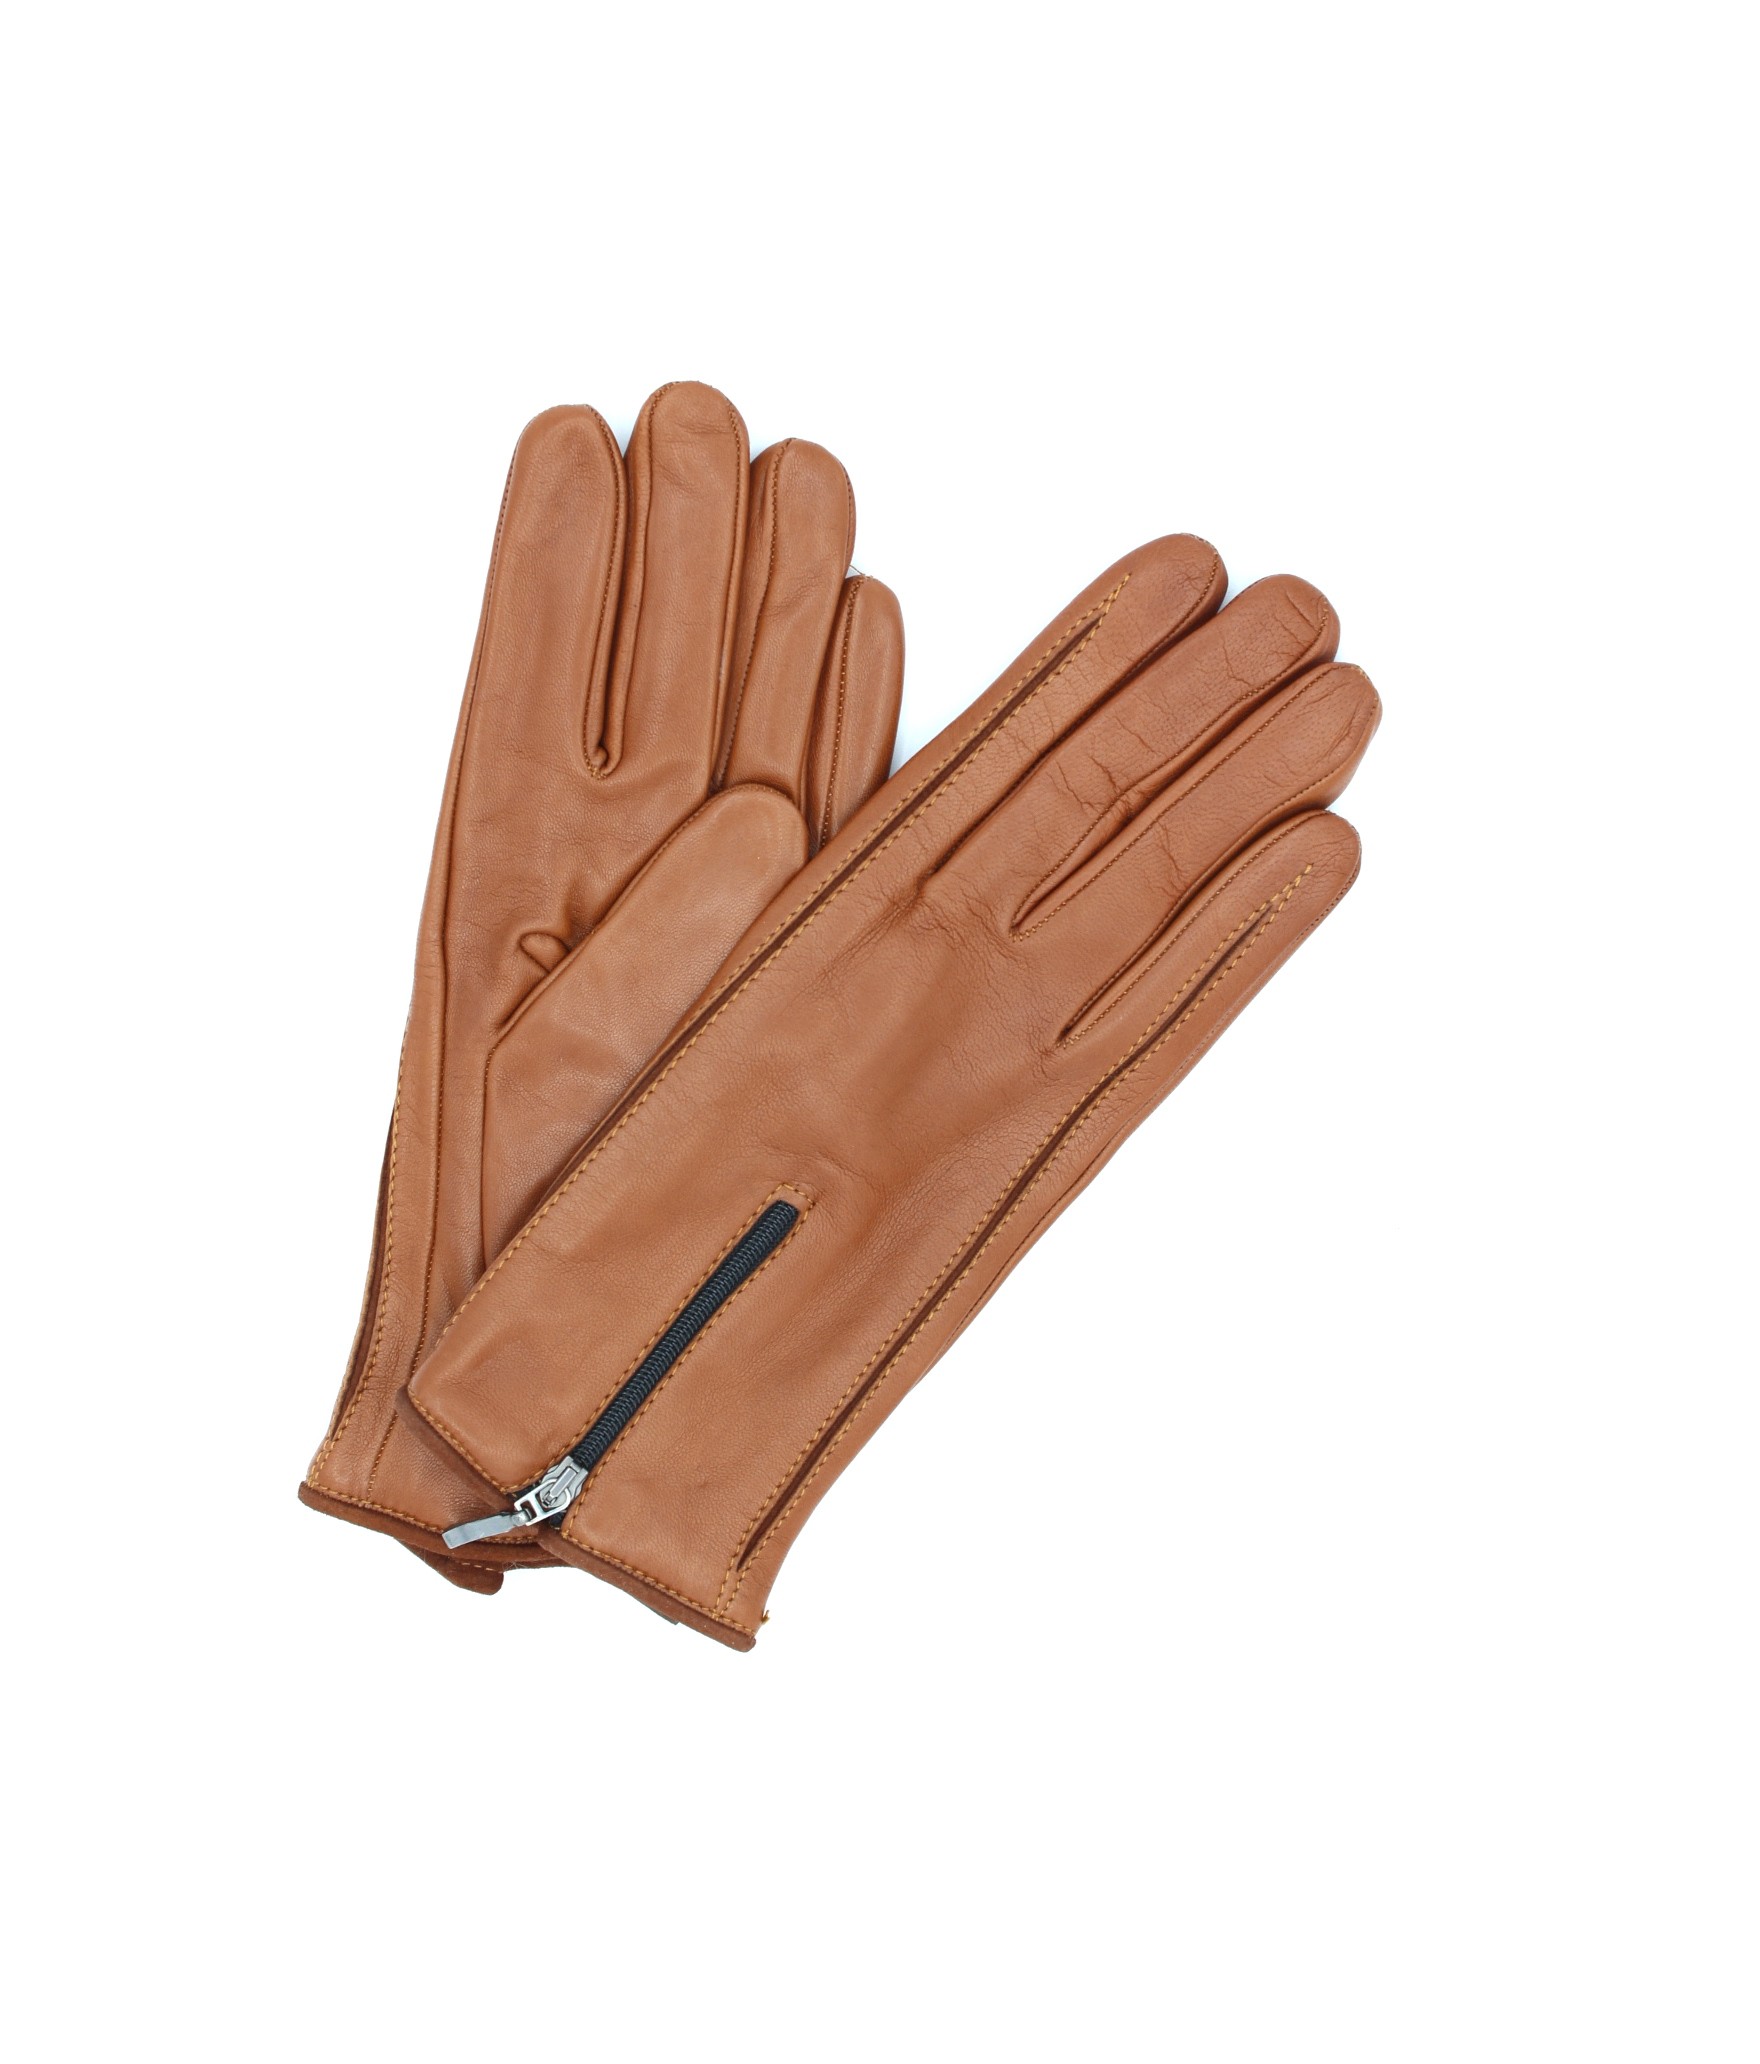 Woman Fashion Nappa leather gloves cashmere lined with Zip Tan